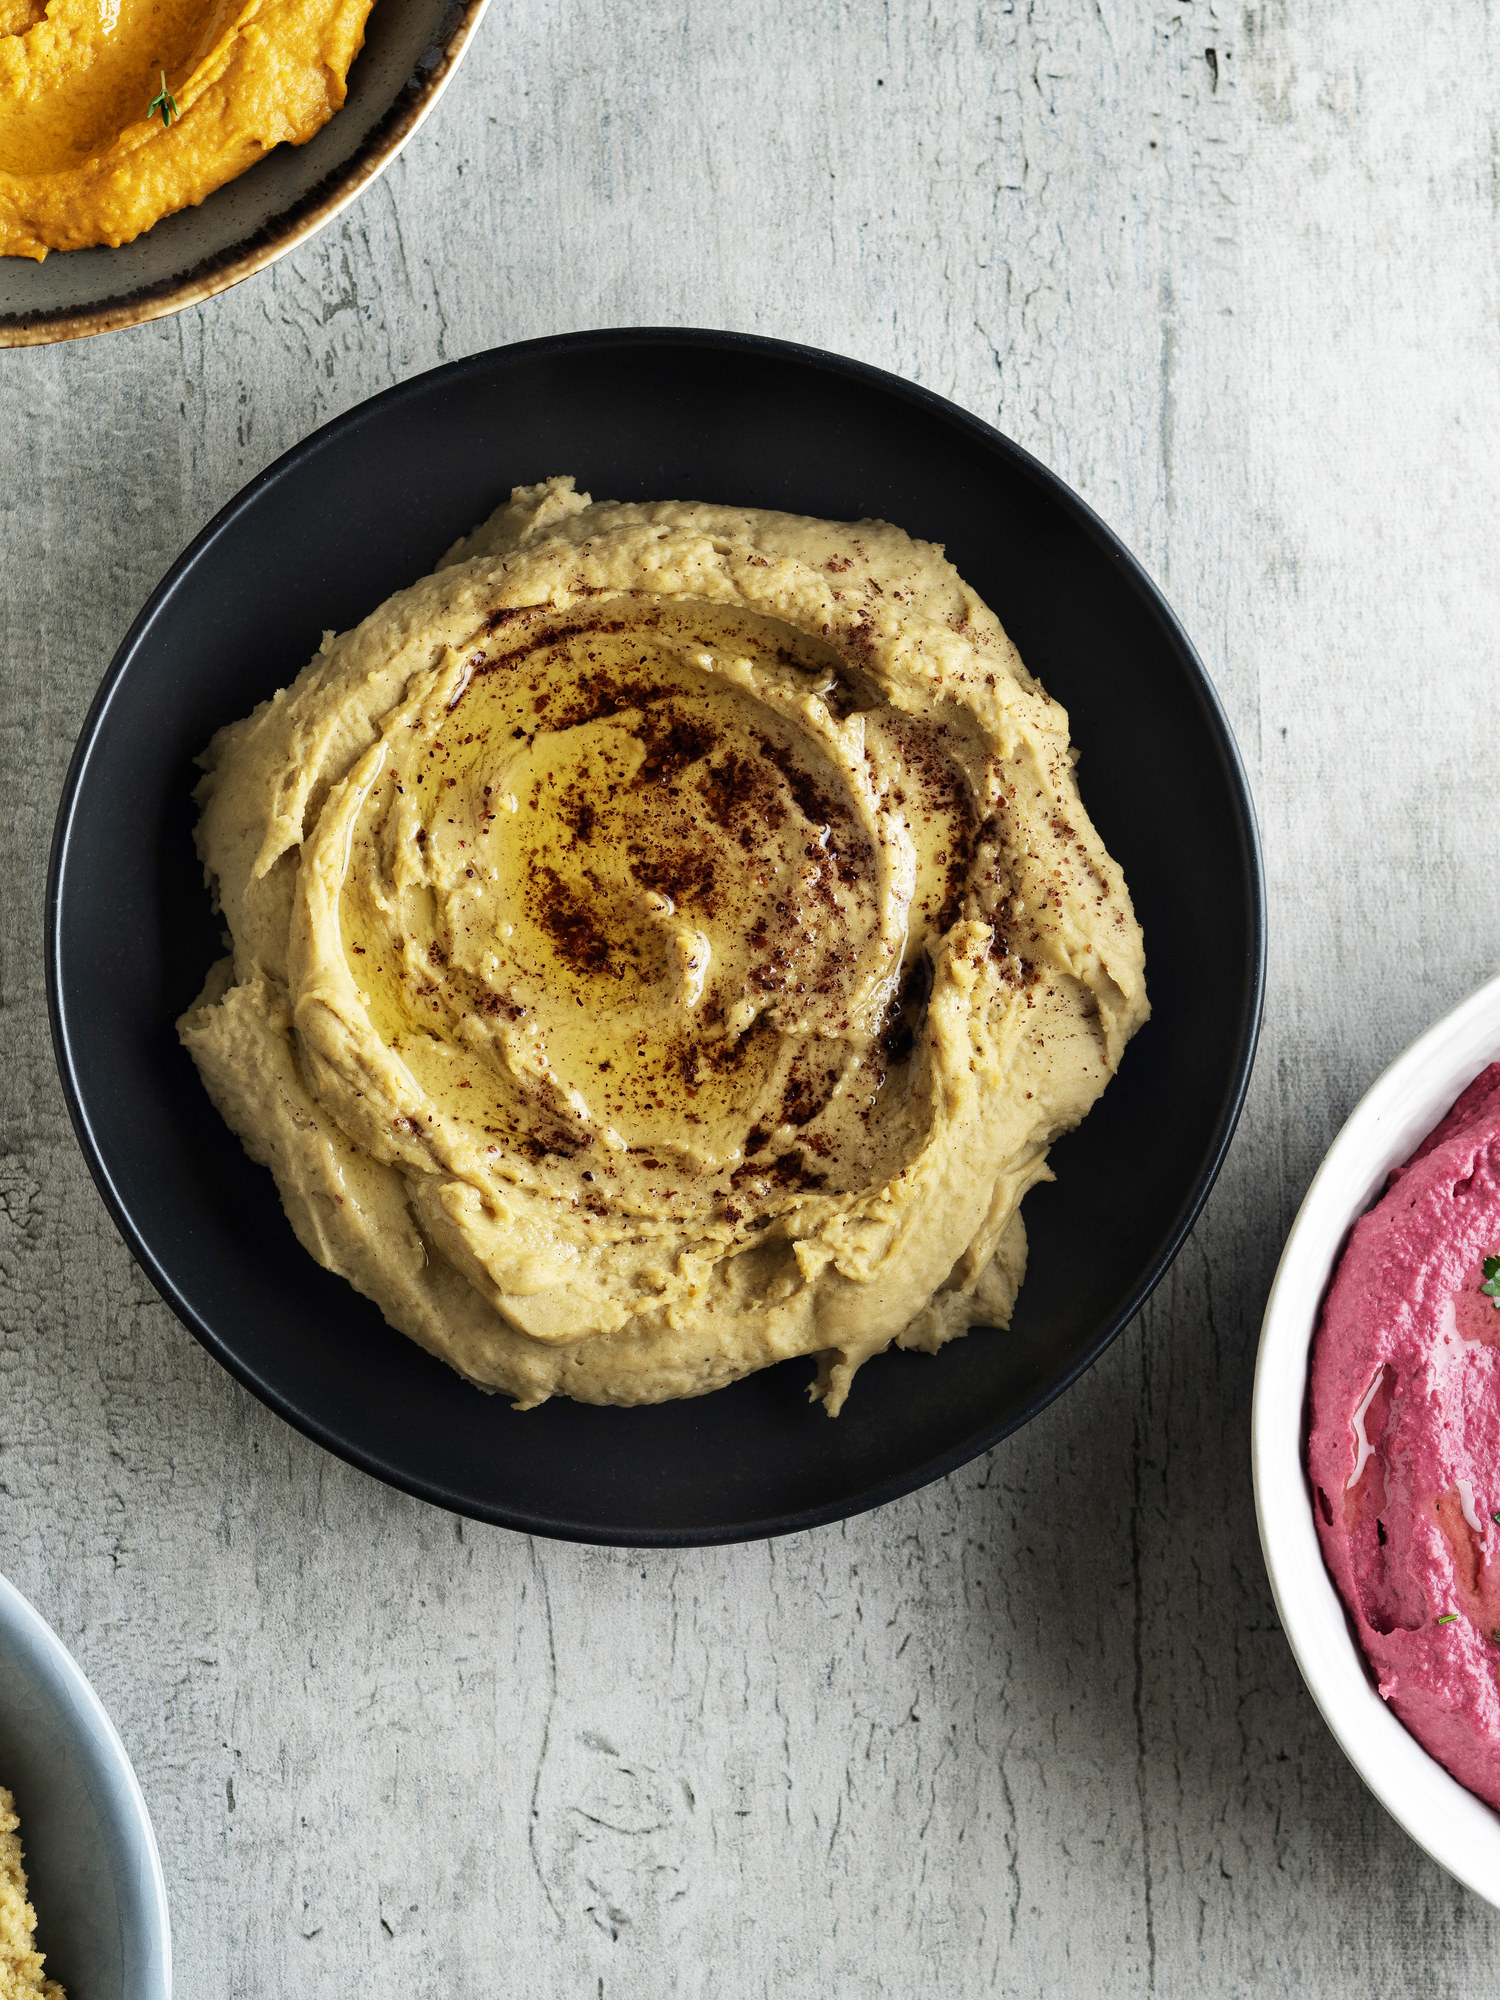 Hummus topped with sumac.